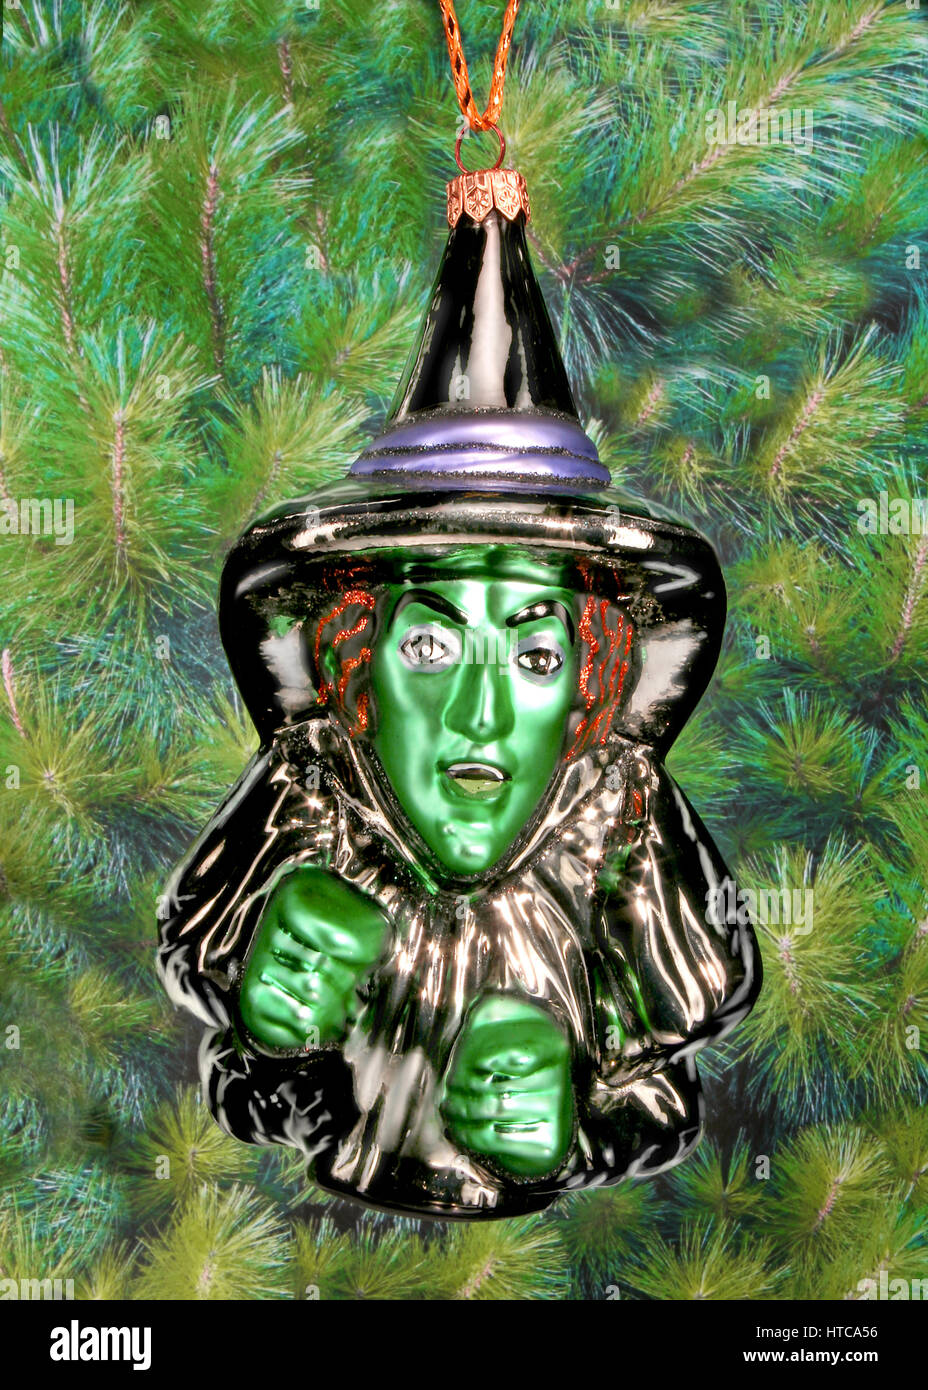 Christmas bauble in the shape of the Wicked Witch from the Wizard of Oz Stock Photo